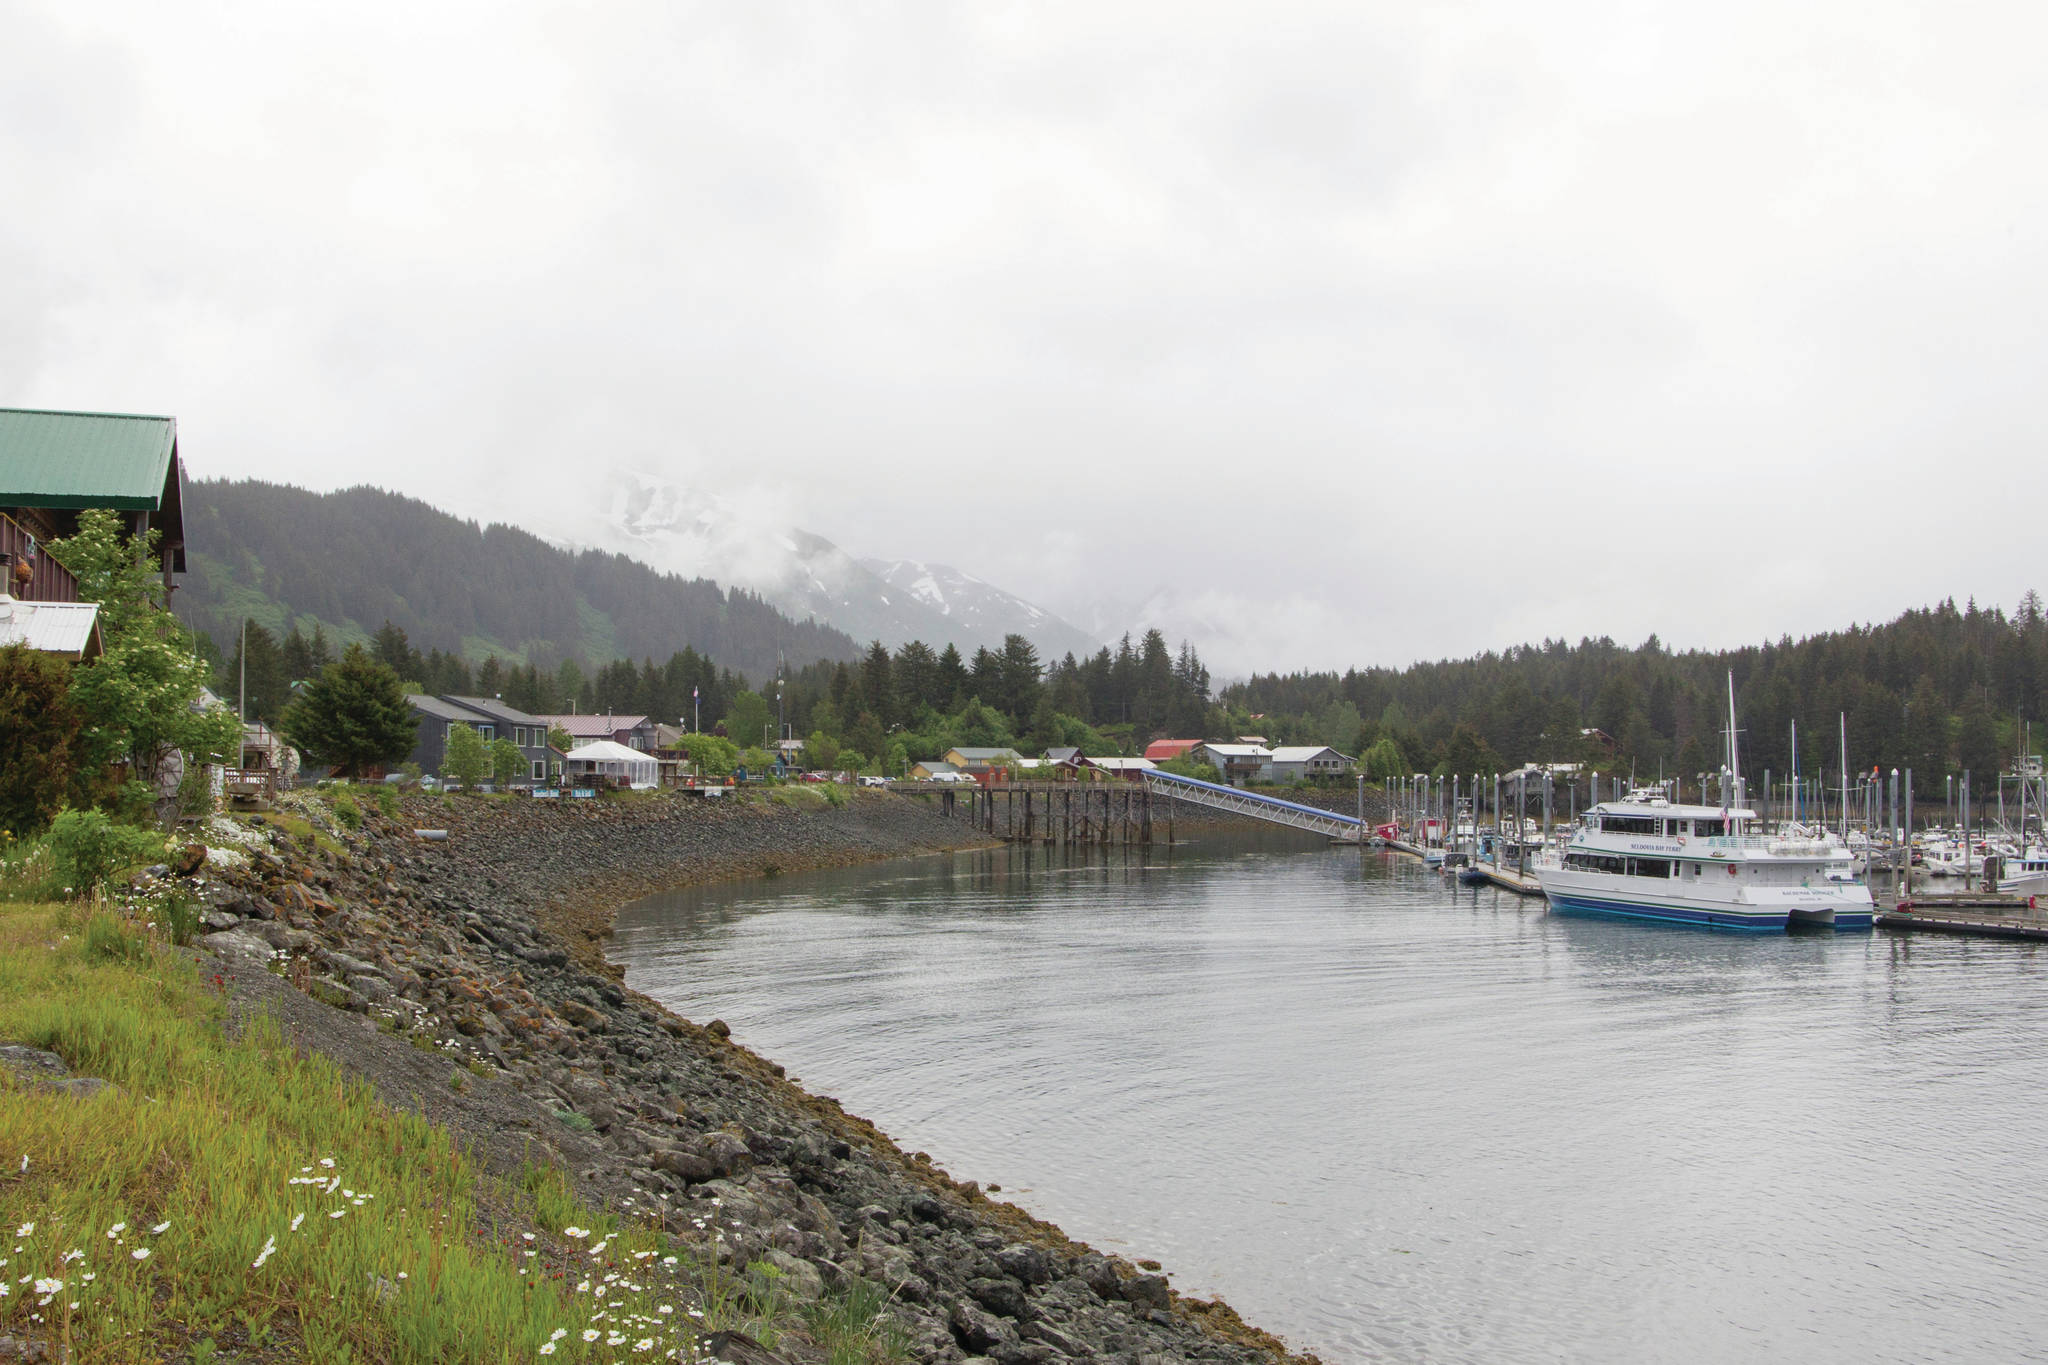 Seldovia as seen on Thursday, June 24, 2021. The steady rain didn’t stop boats filled with tourists from arriving in town. (Photo by Sarah Knapp/Homer News)